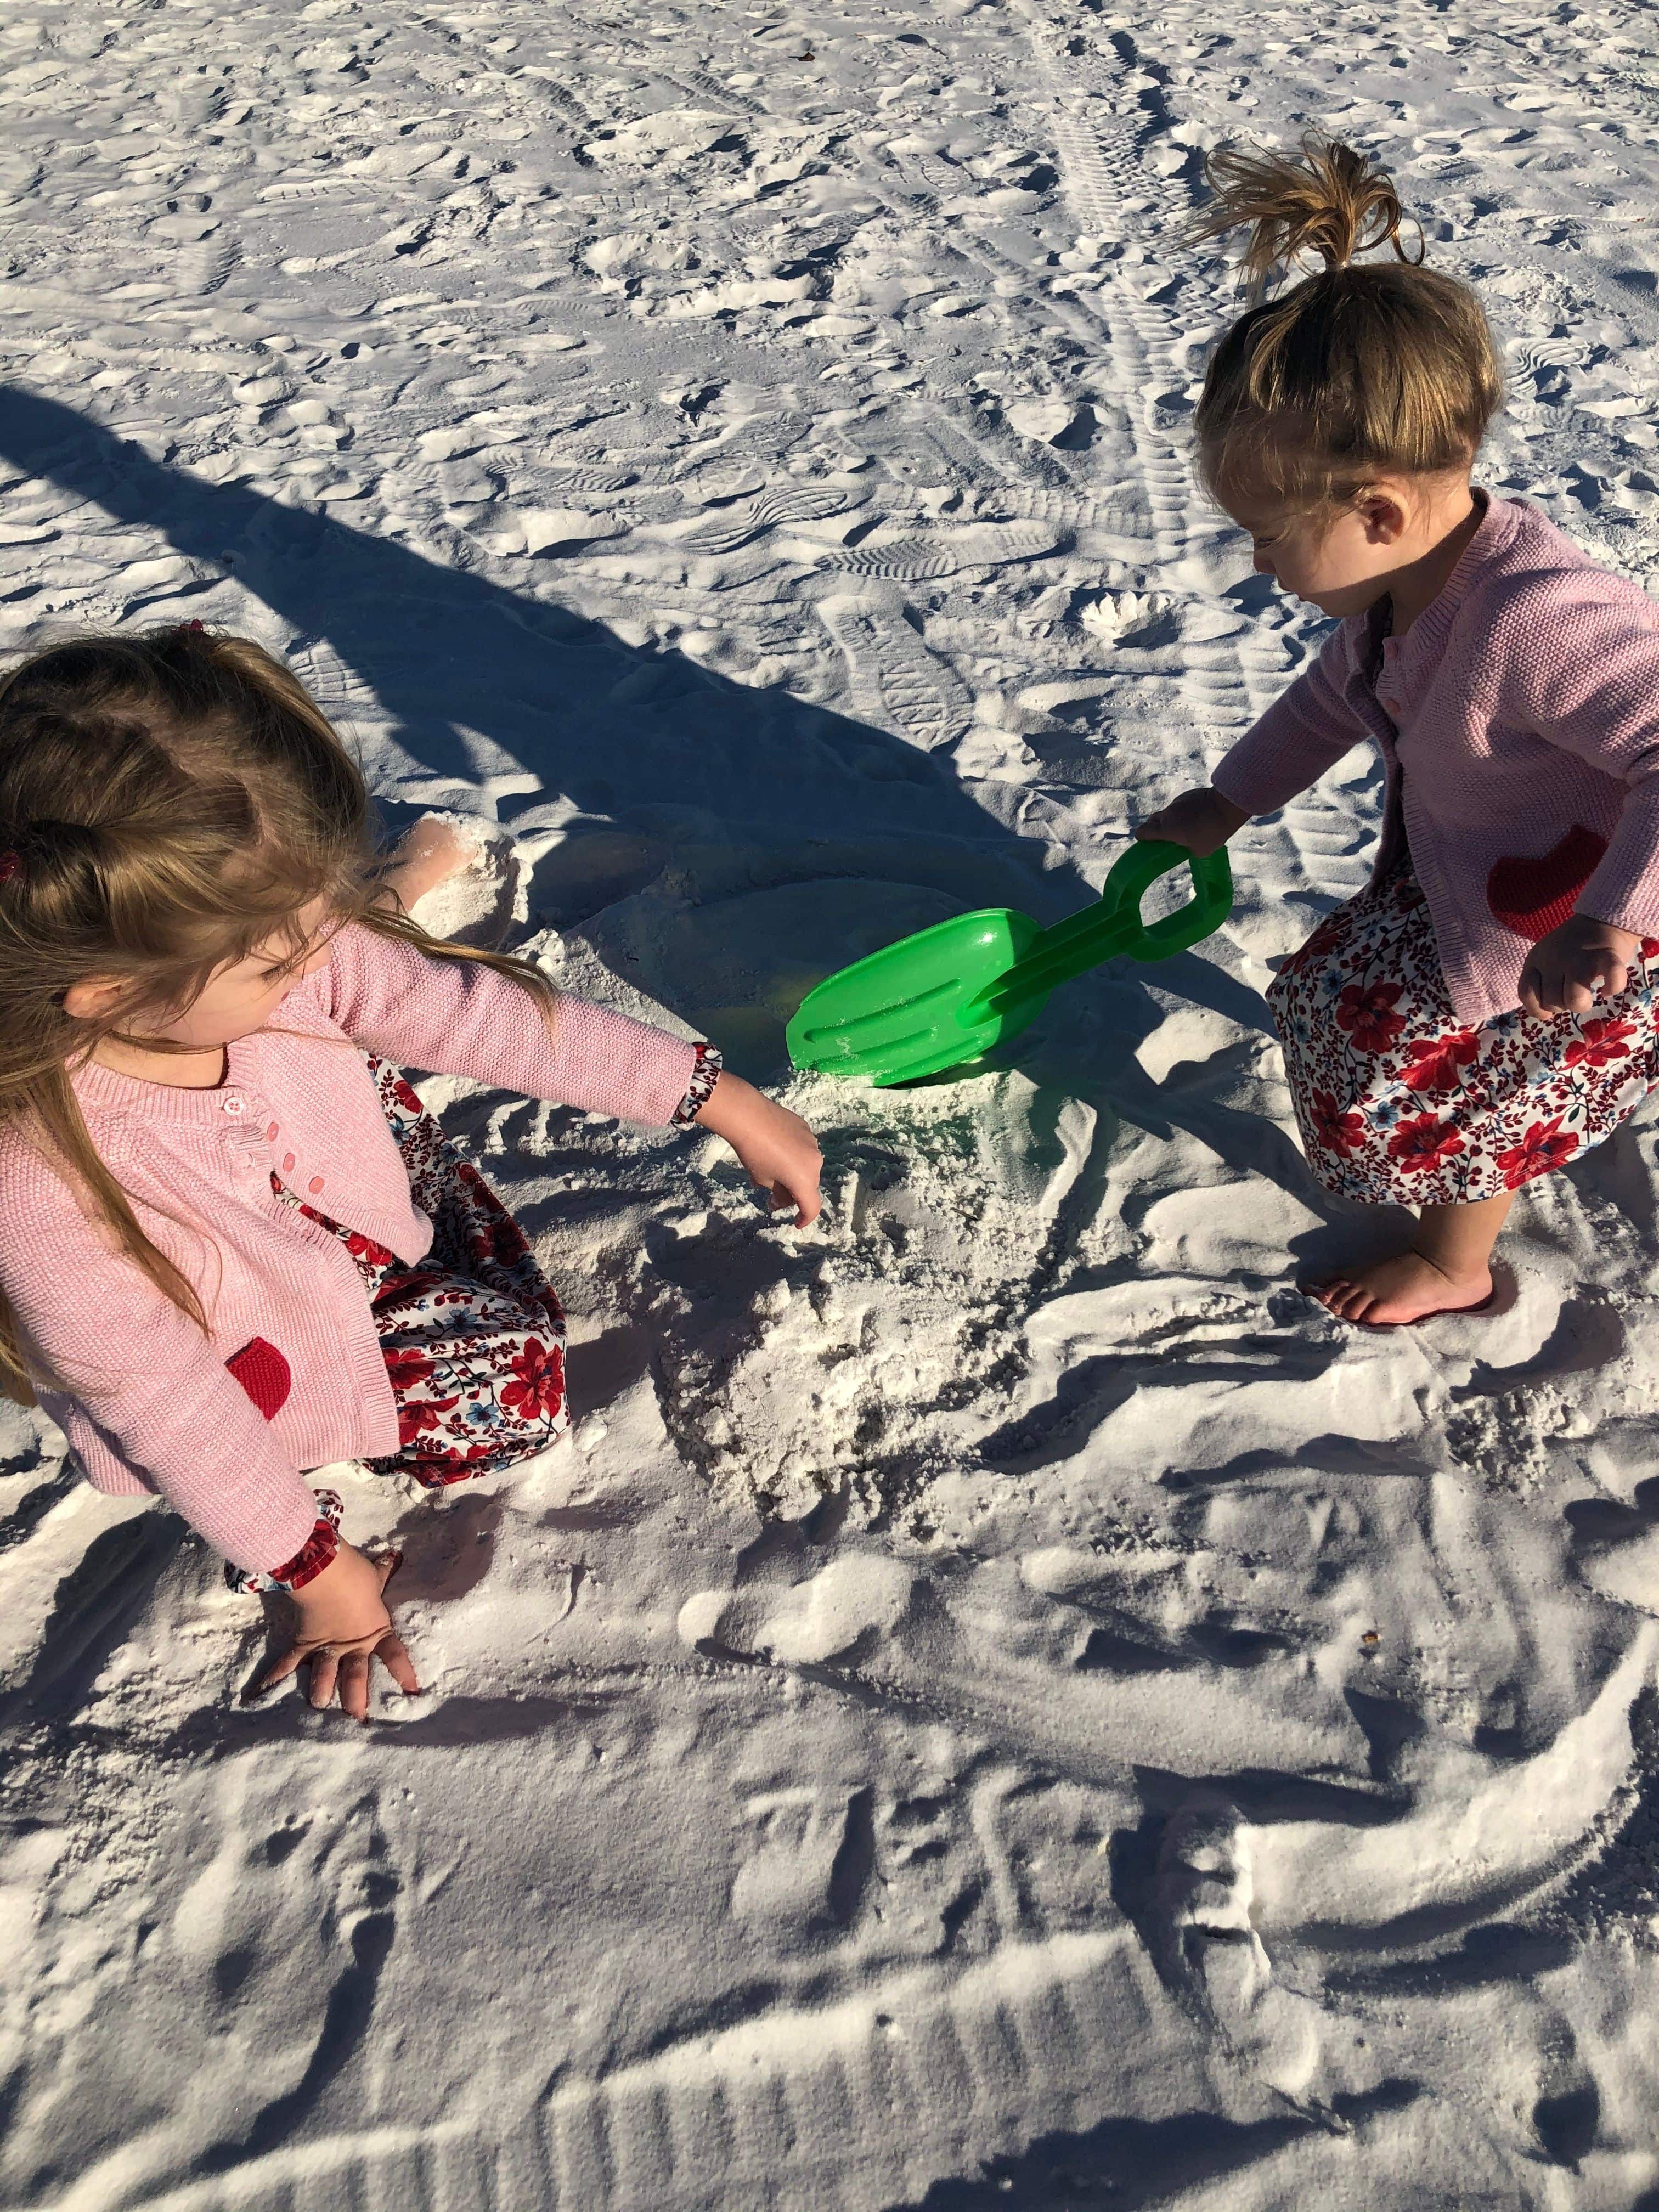 Children playing in the Sparkling white sand